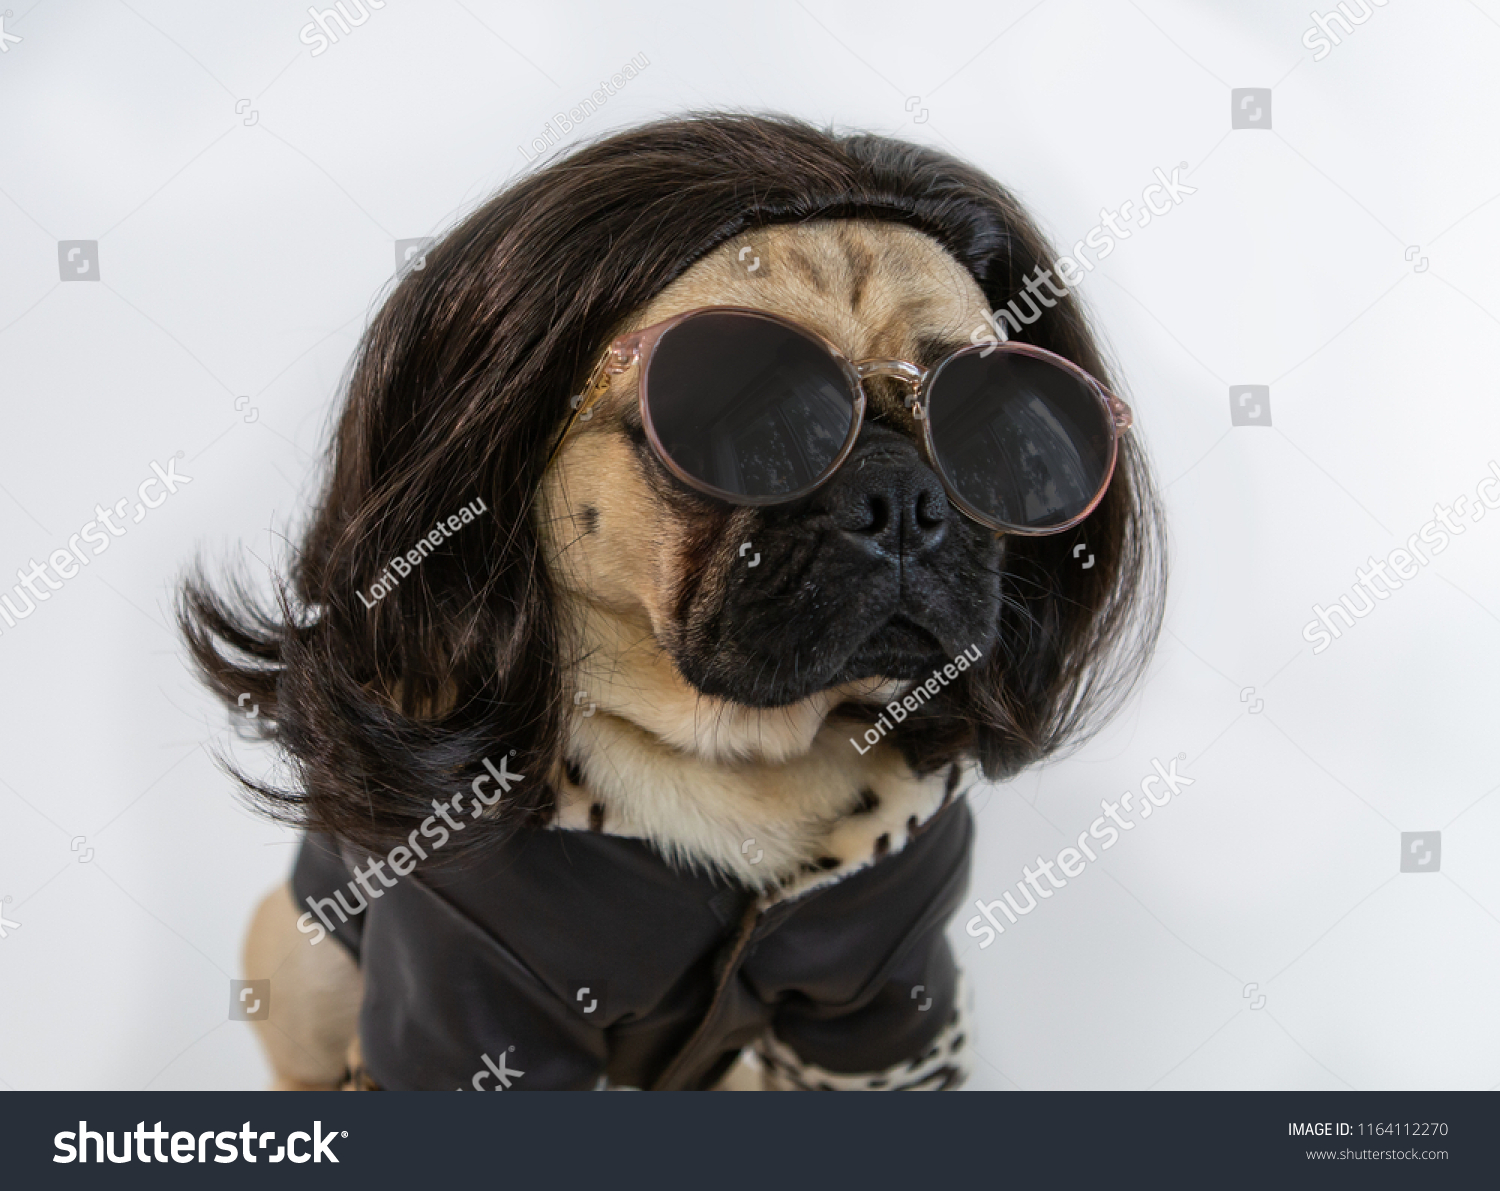 Cute funny pug wearing sunglasses, a brown haired wig and leather jacket #1164112270